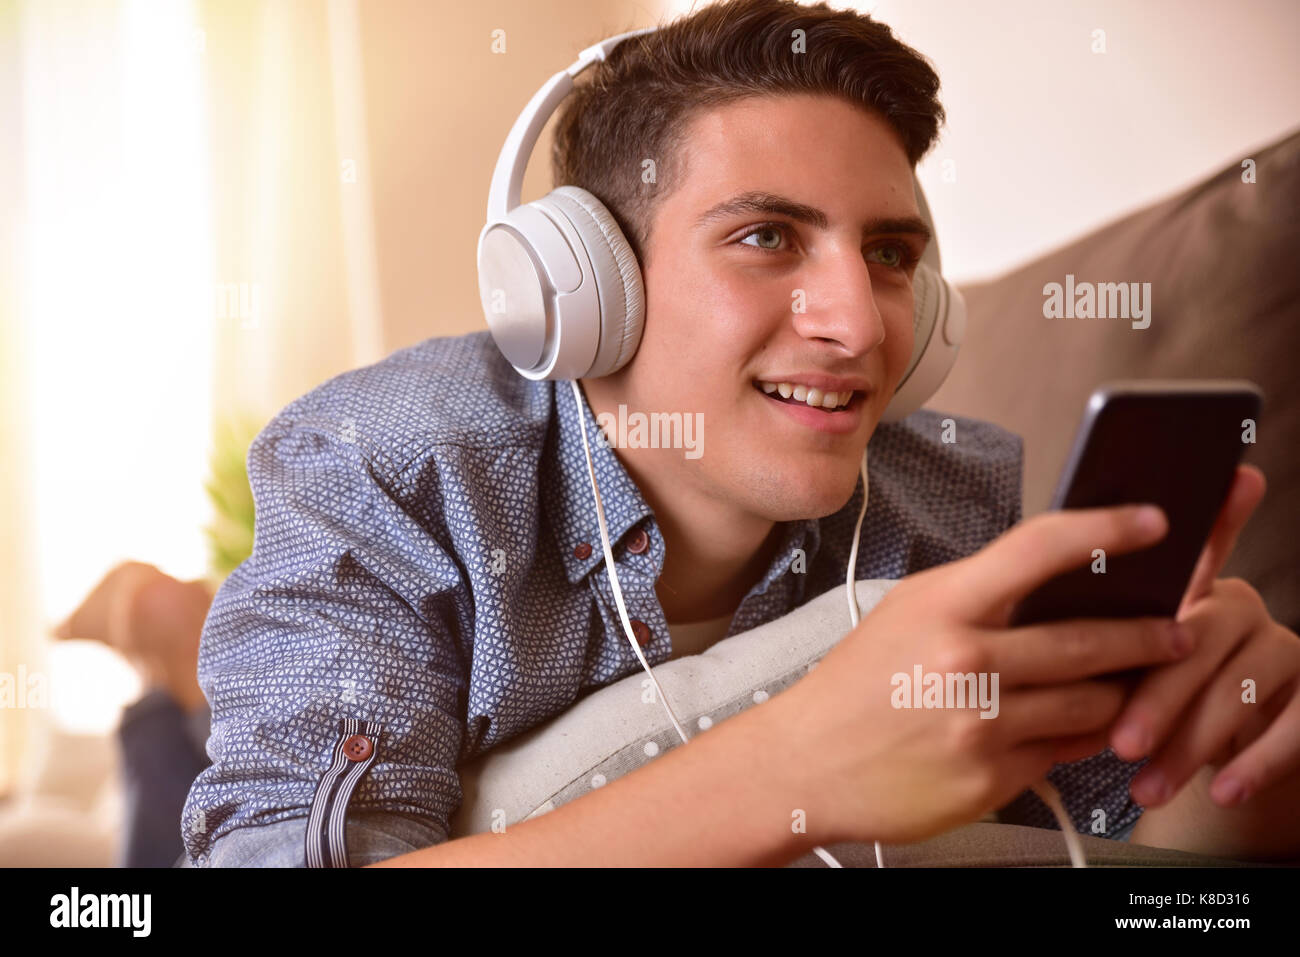 Teen listening music with headphones from mobile lying face down on couch Stock Photo